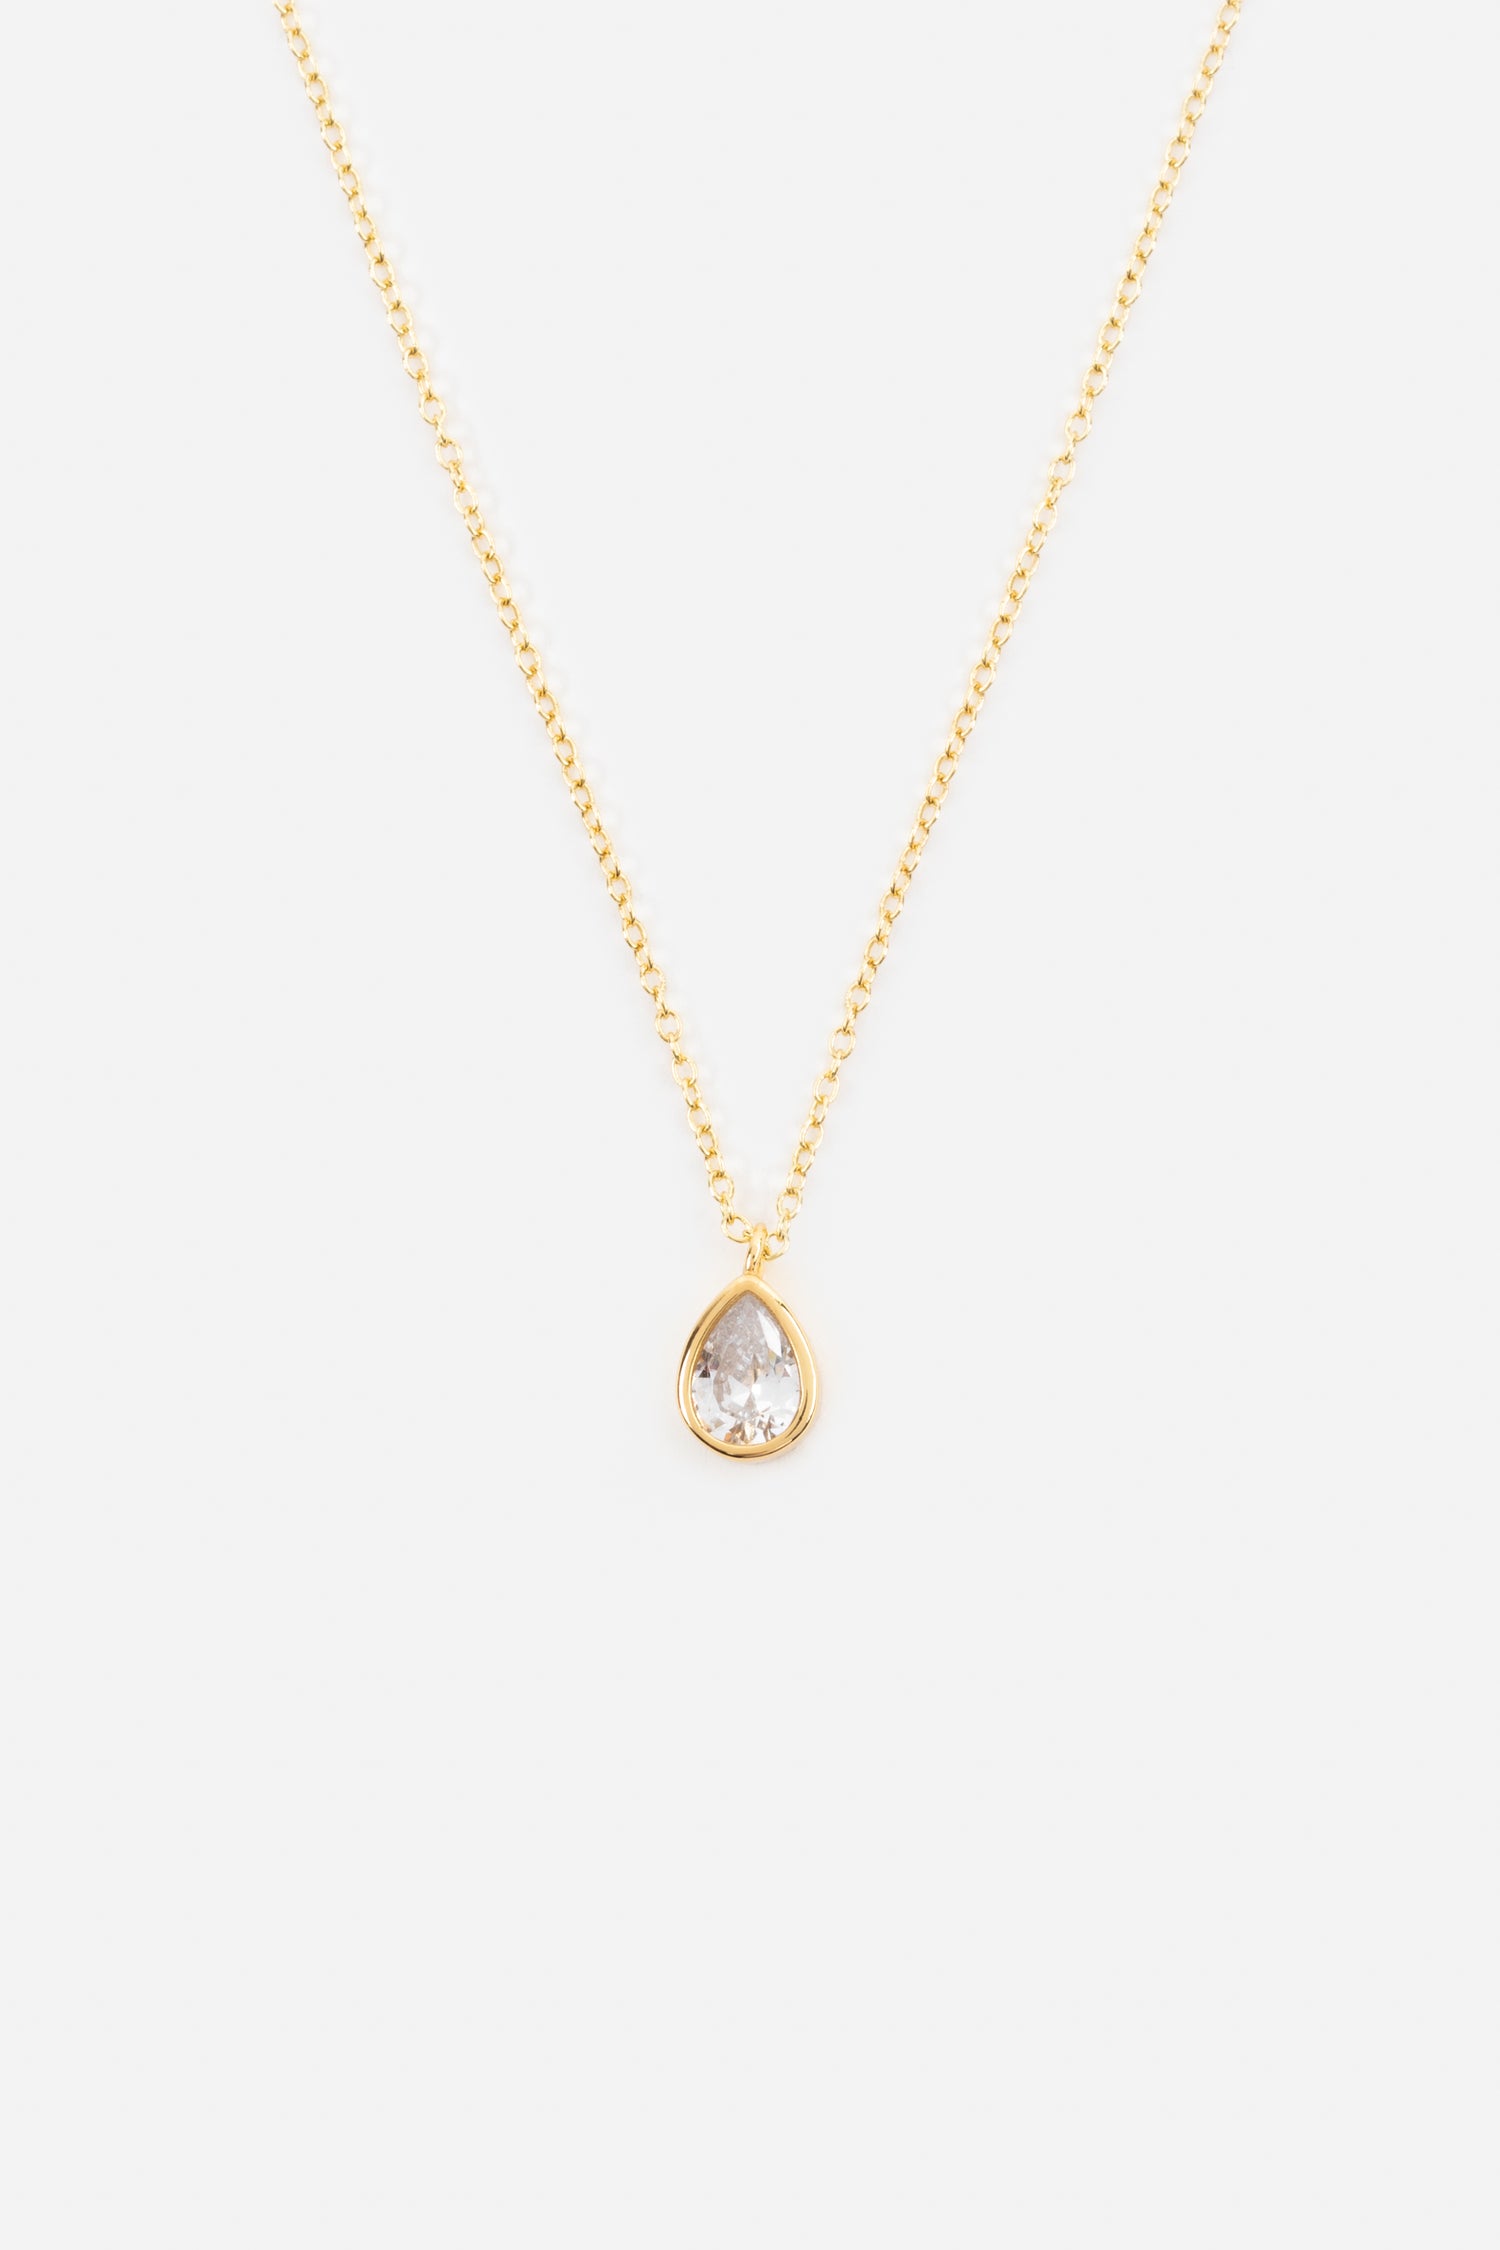 teardrop pendant with a cubic zirconia insert on a gold plated chain necklace